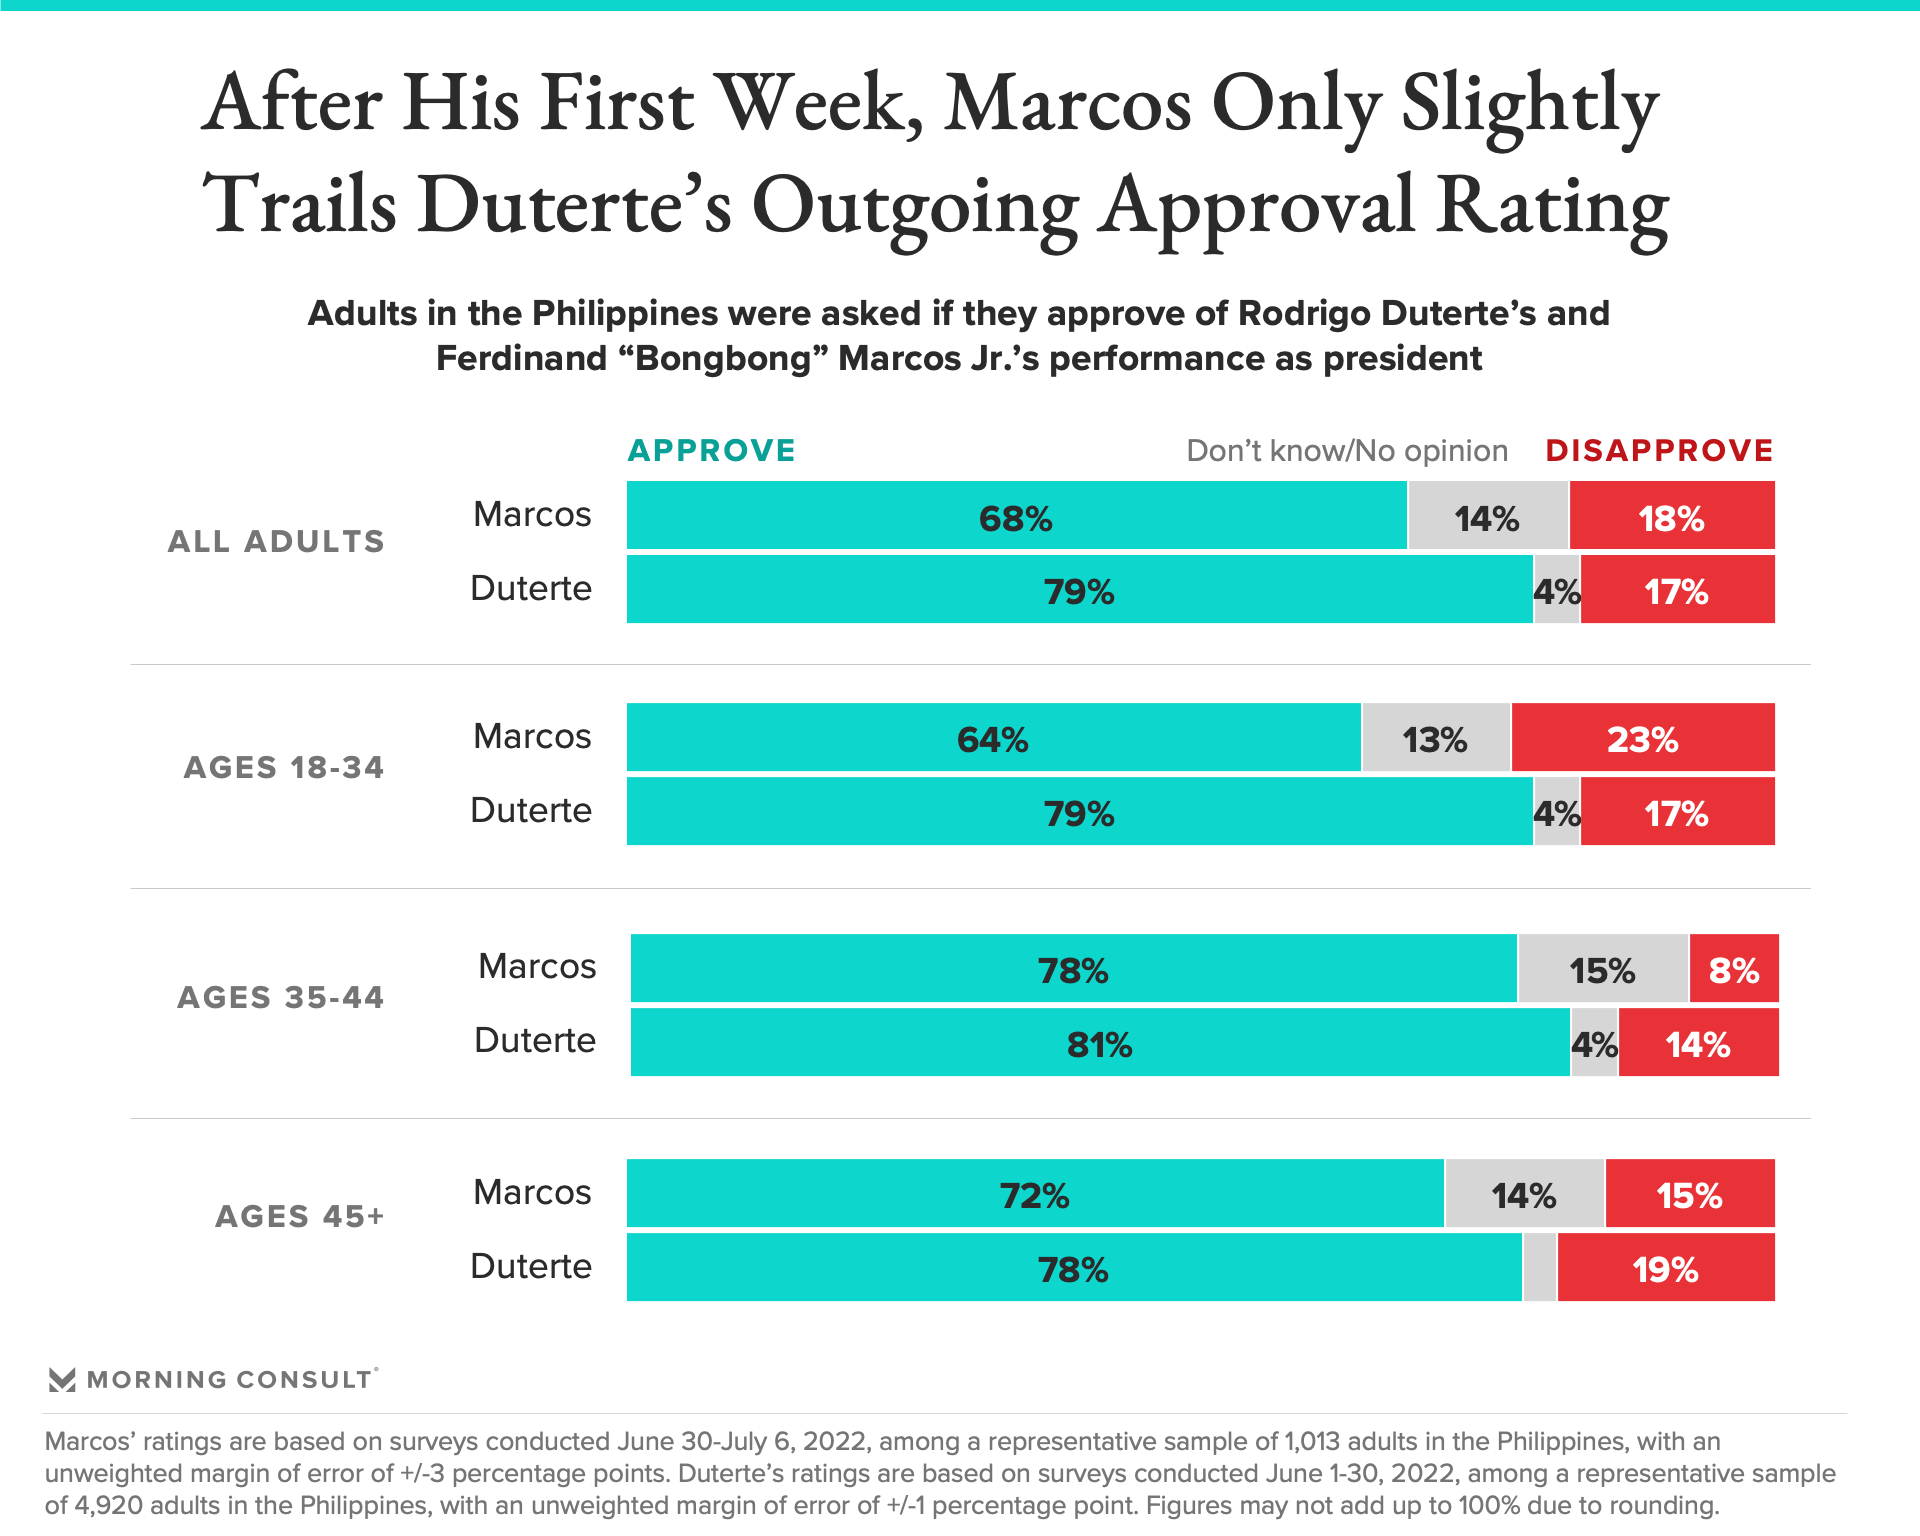 Bar charts showing popularity of Marcos vs. Duterte